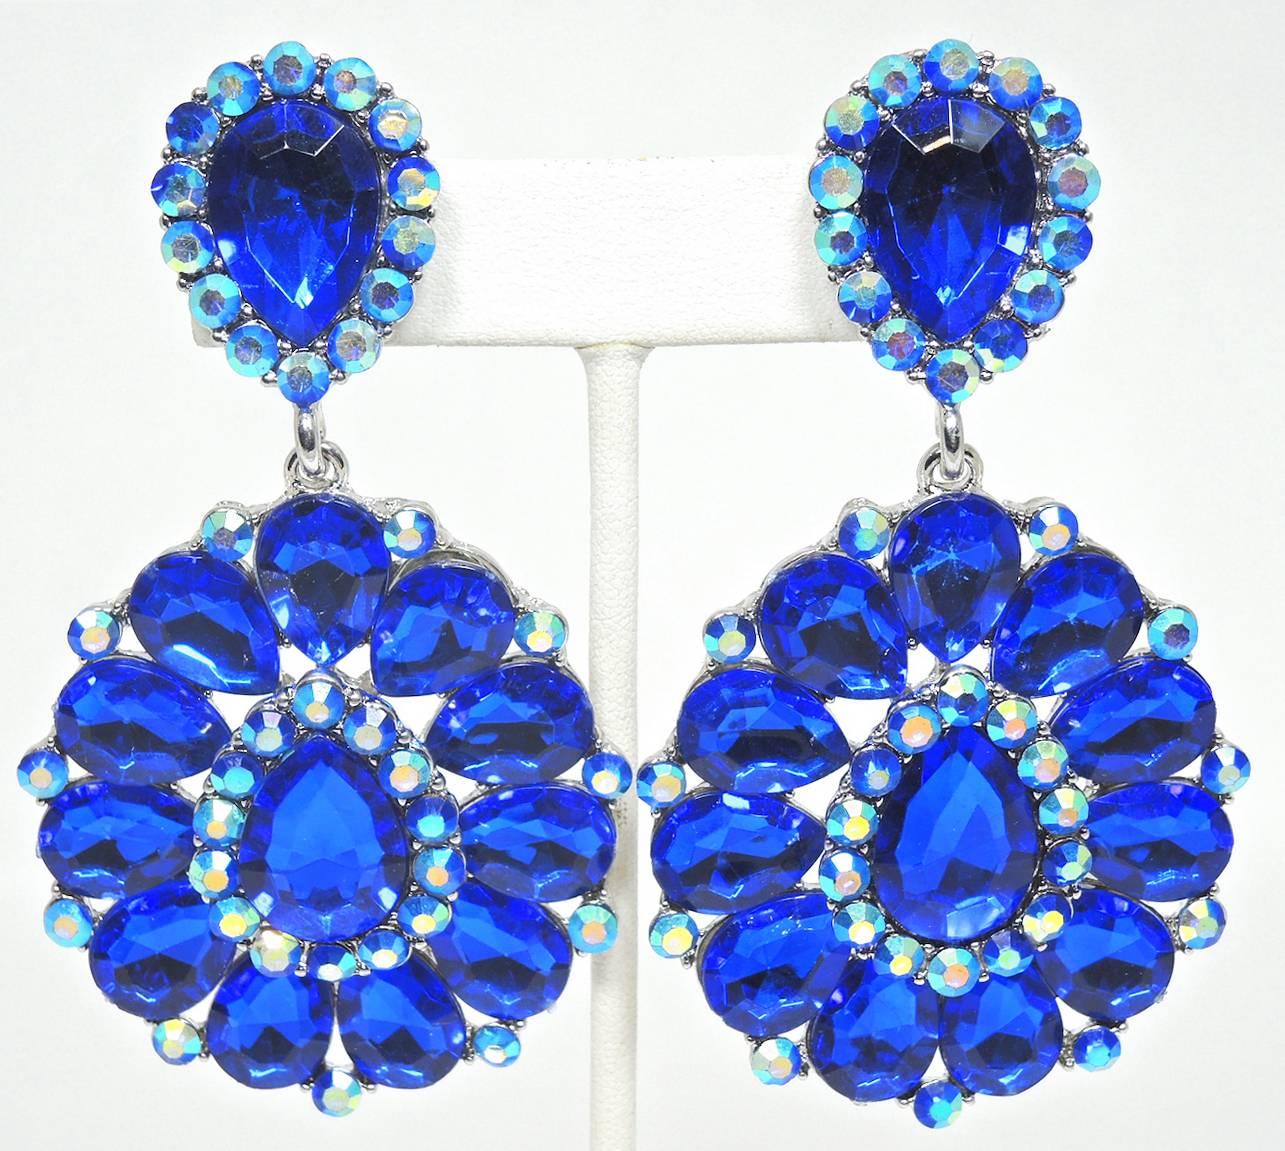 These are a pair of dramatic faux sapphire blue flower clip earrings. They are made with teardrop and round shaped crystals. They are made in a silver tone setting and measure a whopping 3-1/2” x 2”. They are in excellent condition.